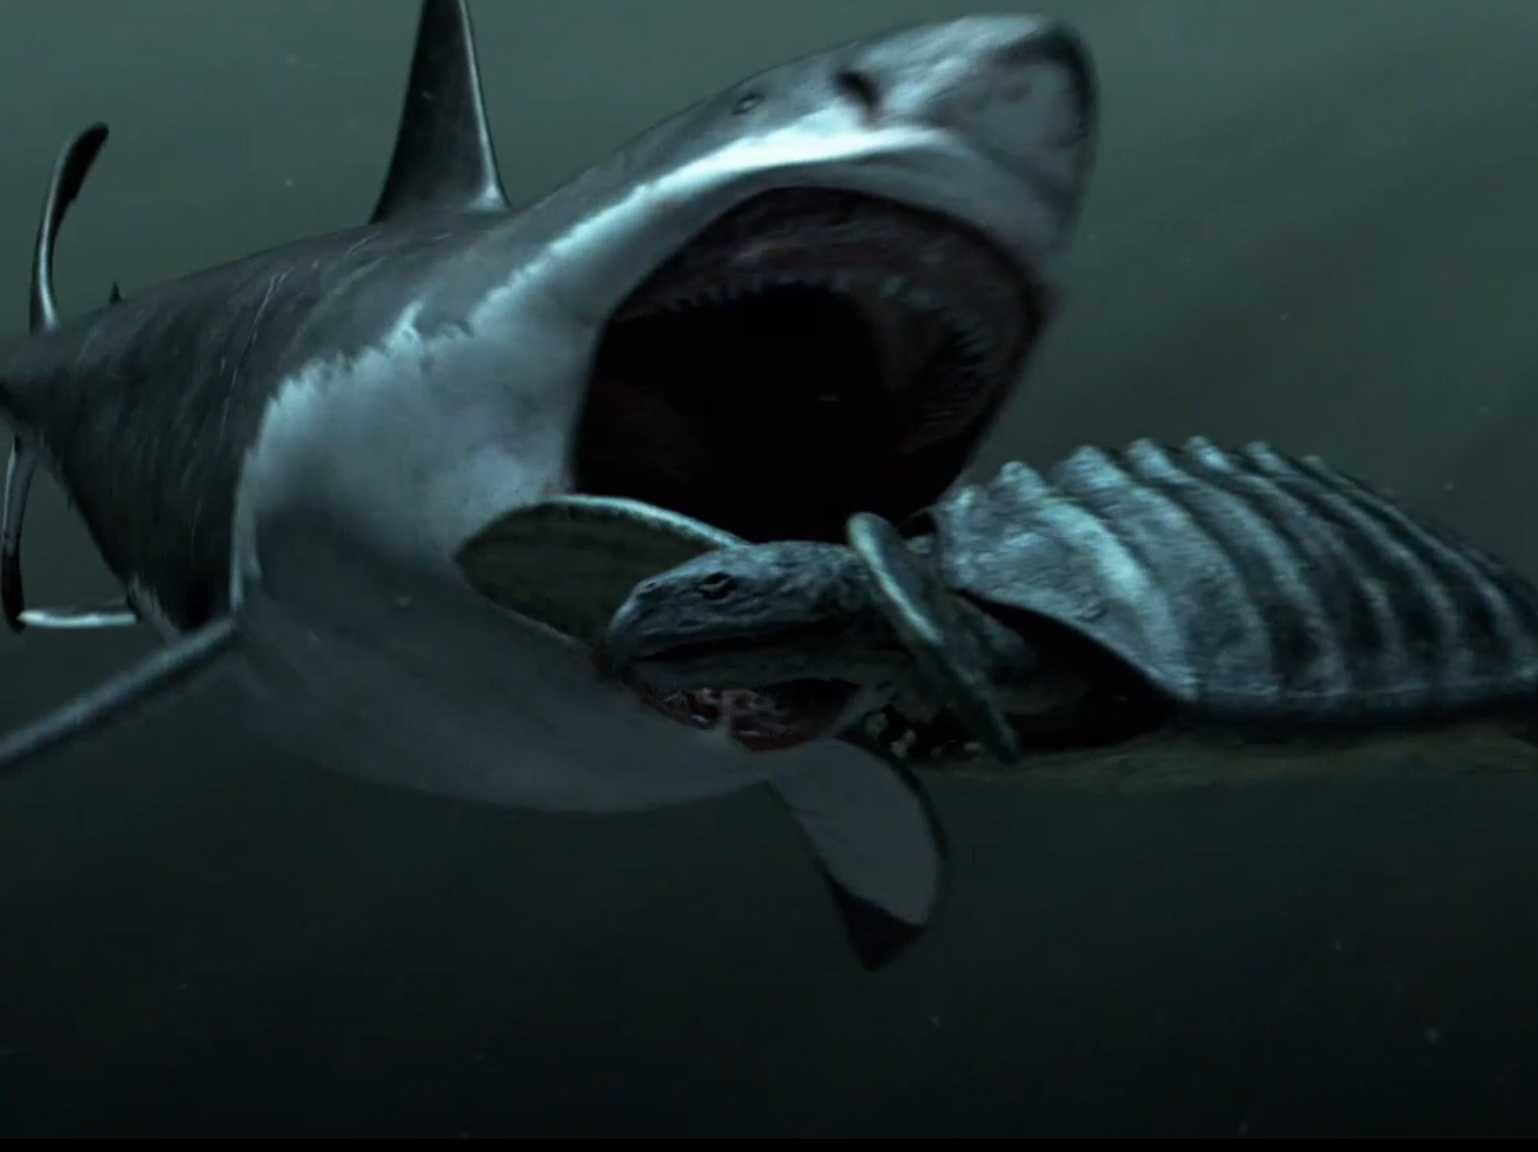 best image about Prehistoric Sharks. To be